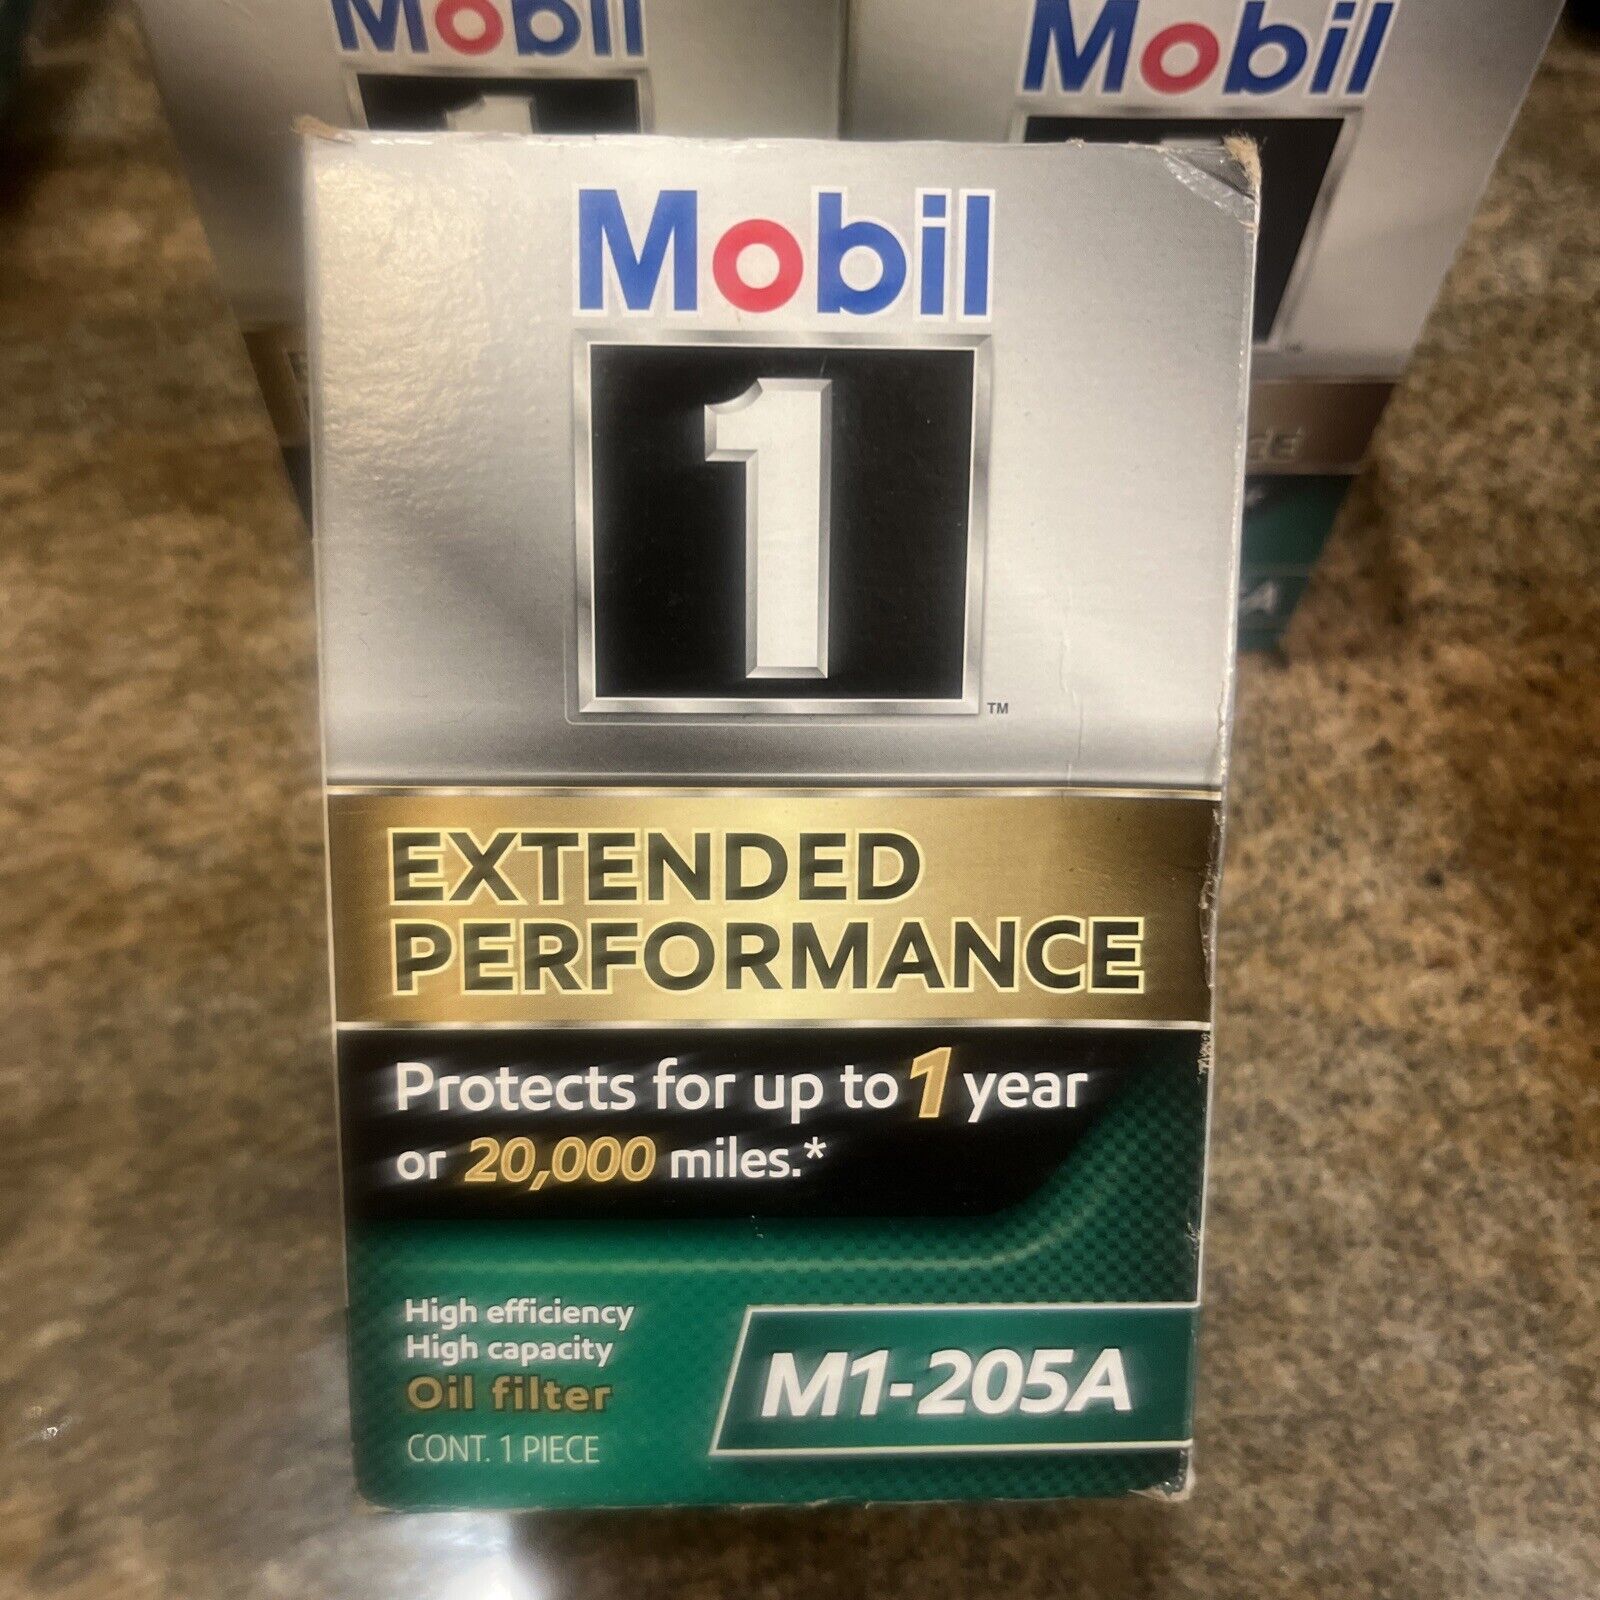 NEW - Mobil 1 M1-205A Extended Performance Oil Filter 